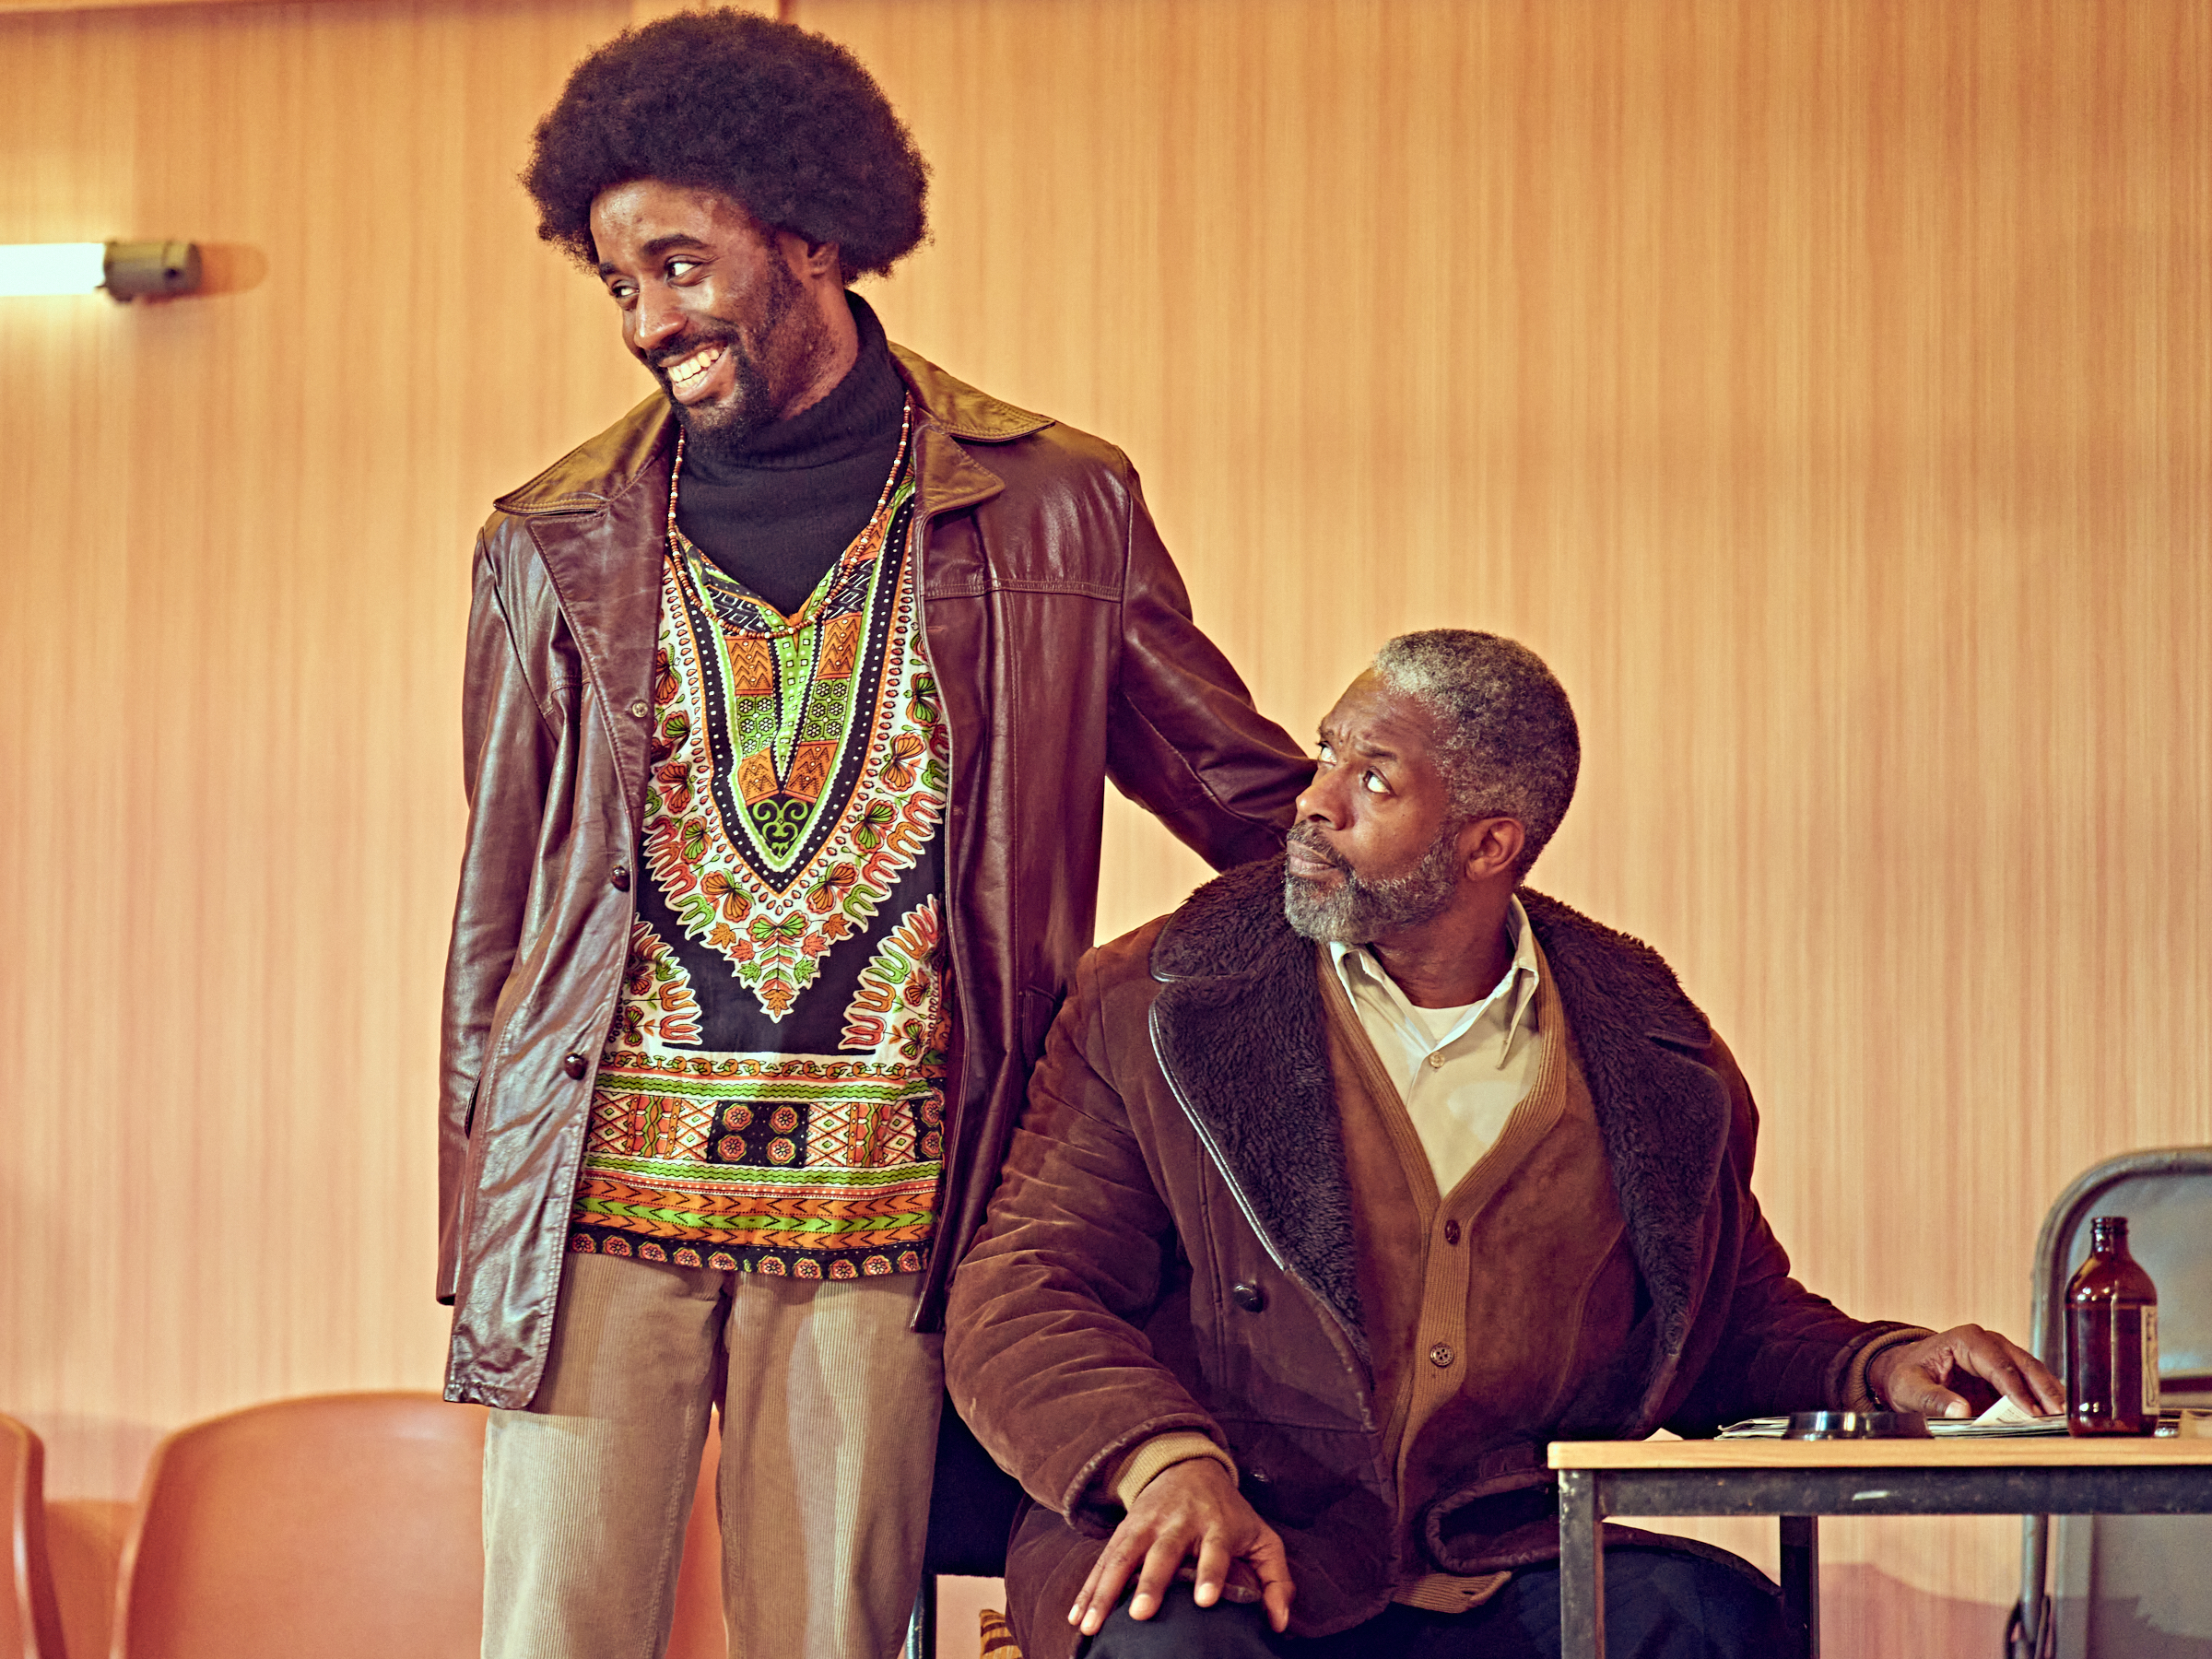 Nnabiko Ejimofor as Shealy and Wil Johnson as Becker in Jitney at The Old Vic